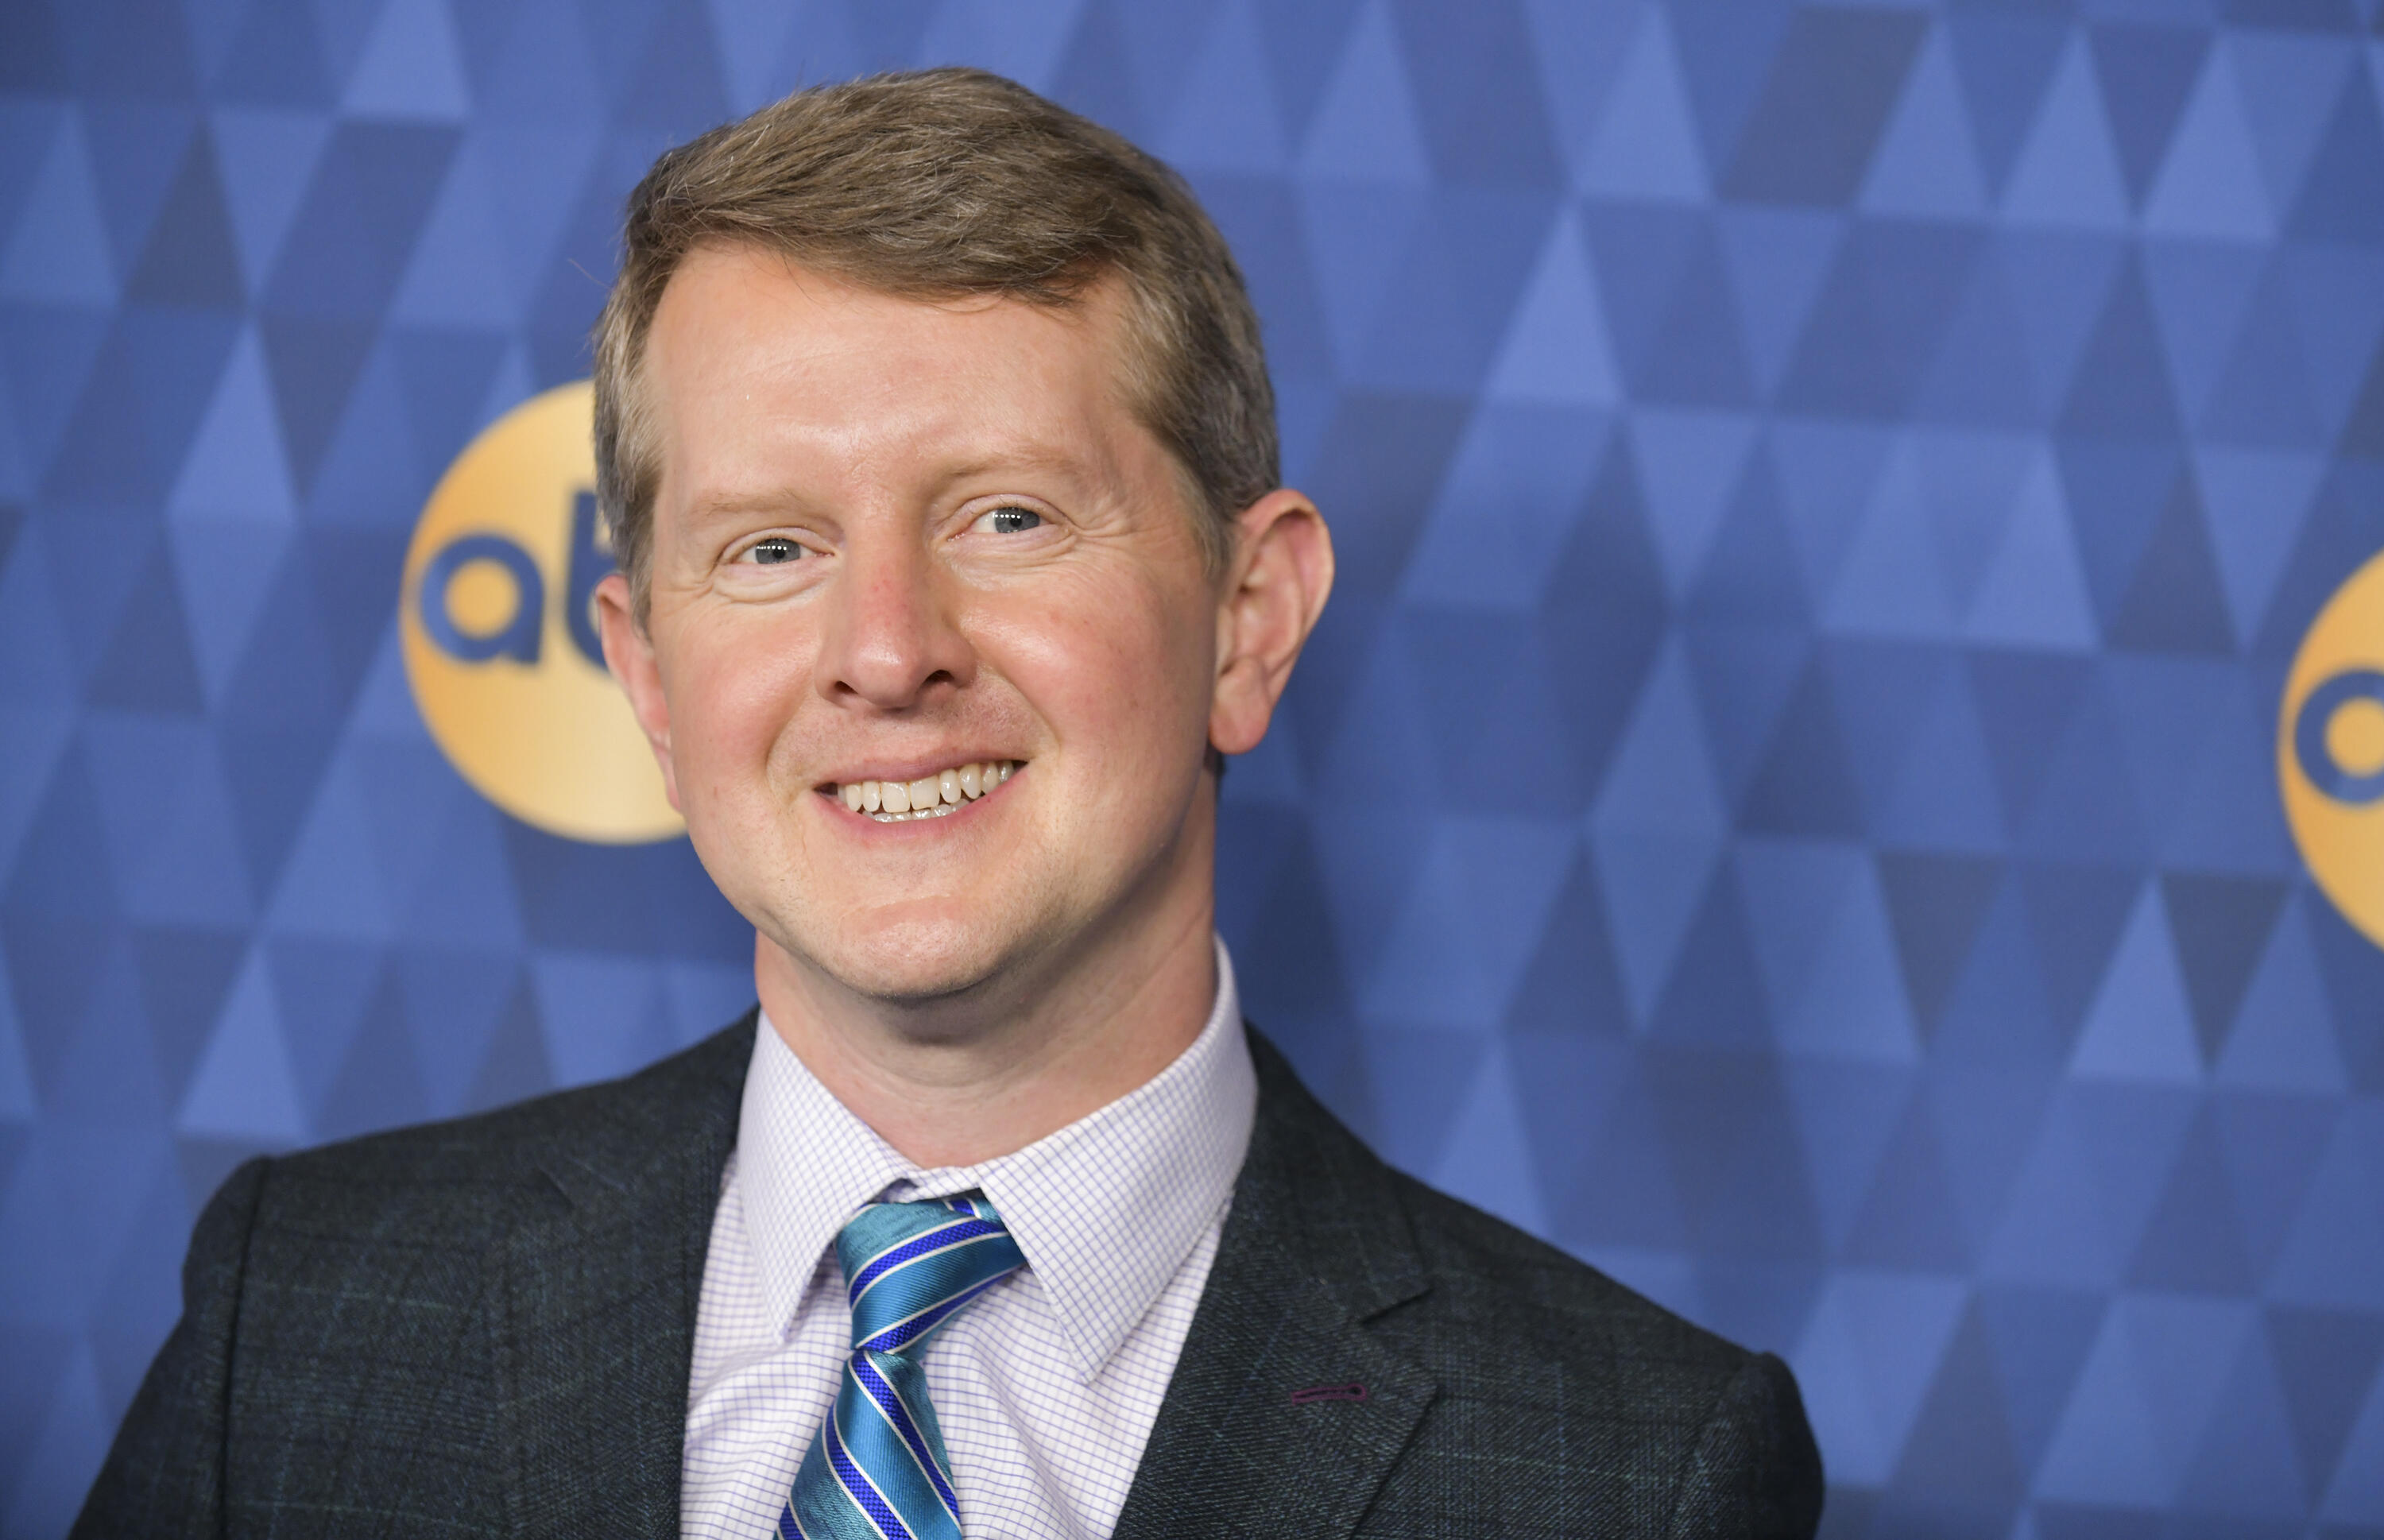 Ken Jennings’ New ‘Jeopardy’ Role Might Mean He’s Next In Line To Host